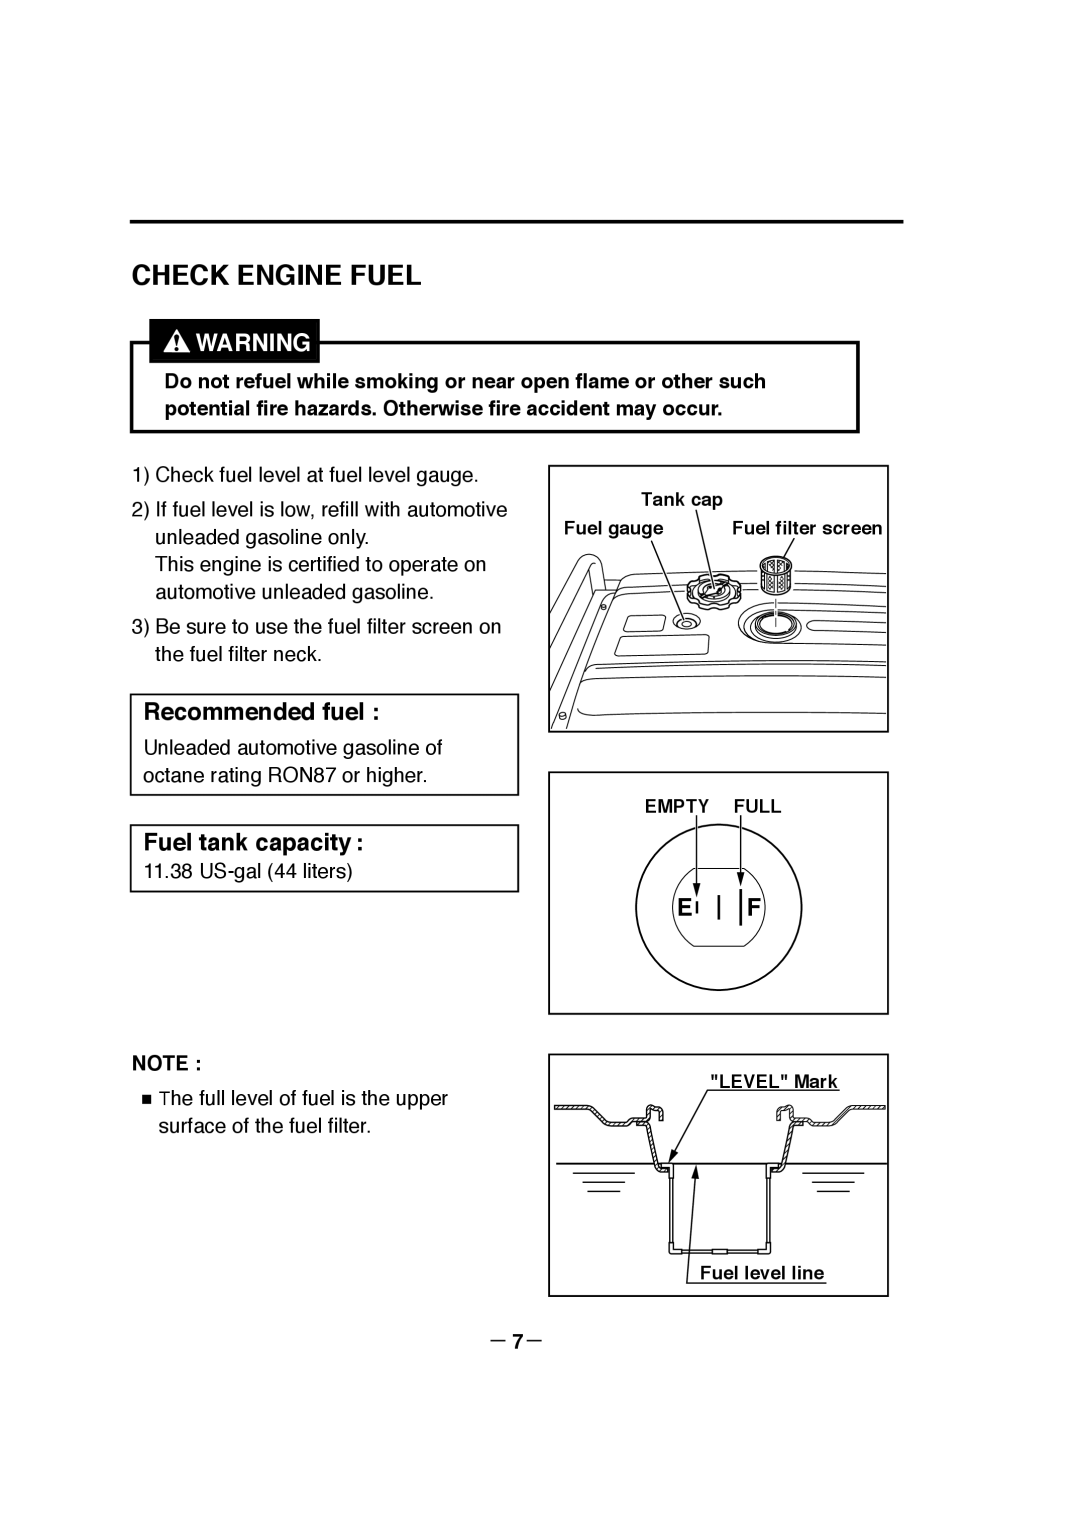 Makita G12010R manual Check Engine Fuel, Recommended fuel, Fuel tank capacity 